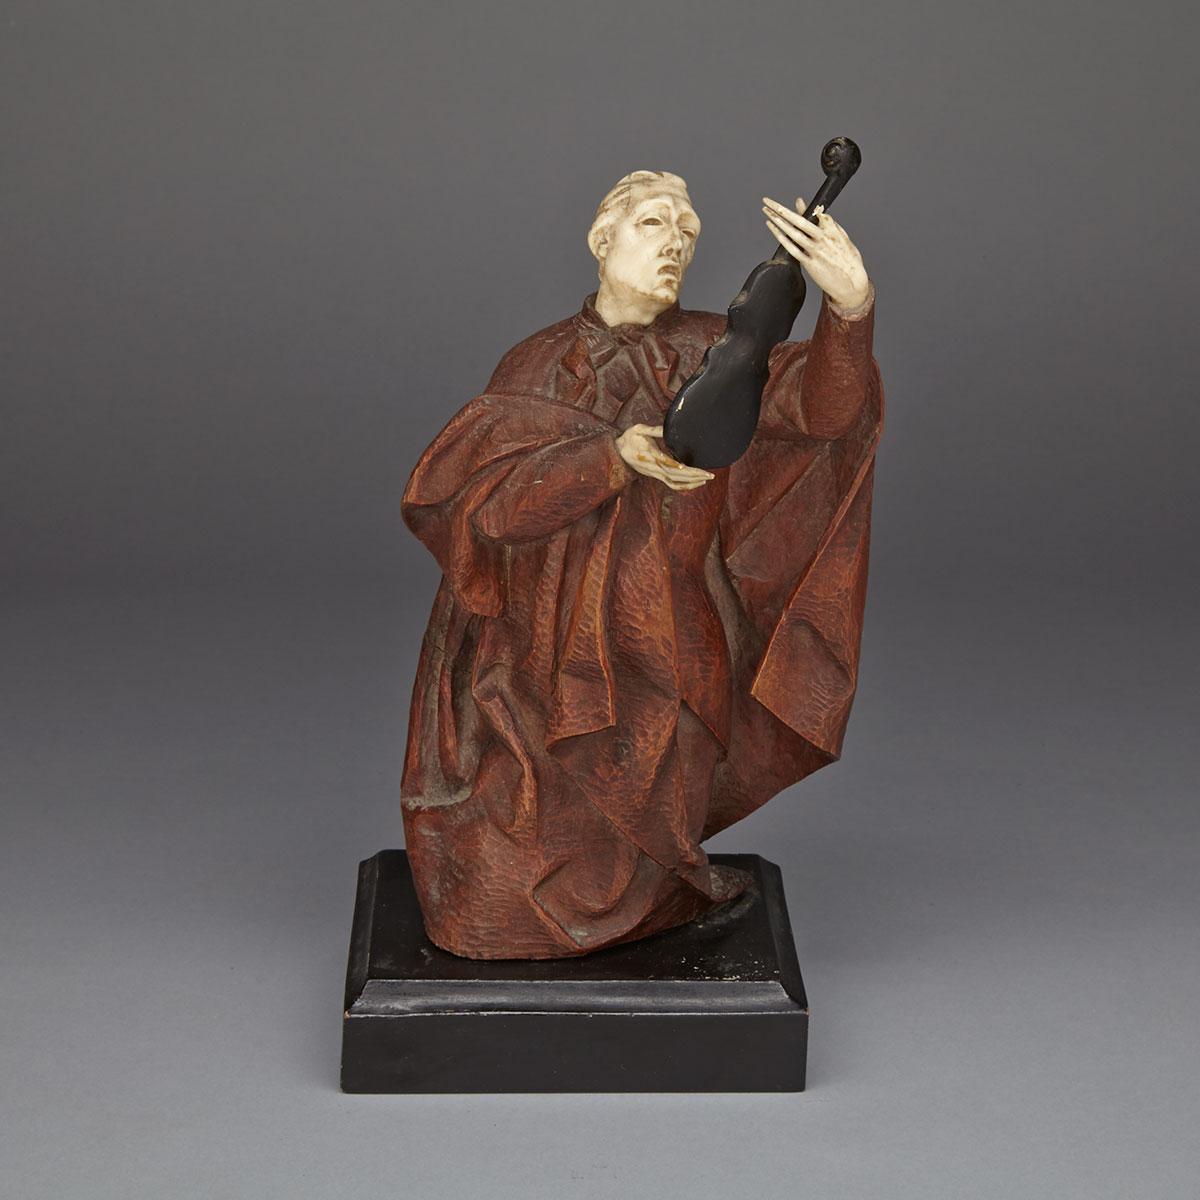 Continental Carved Walnut and Ivory Figure of a Man Adoring a Violin, 19th, early 20th century